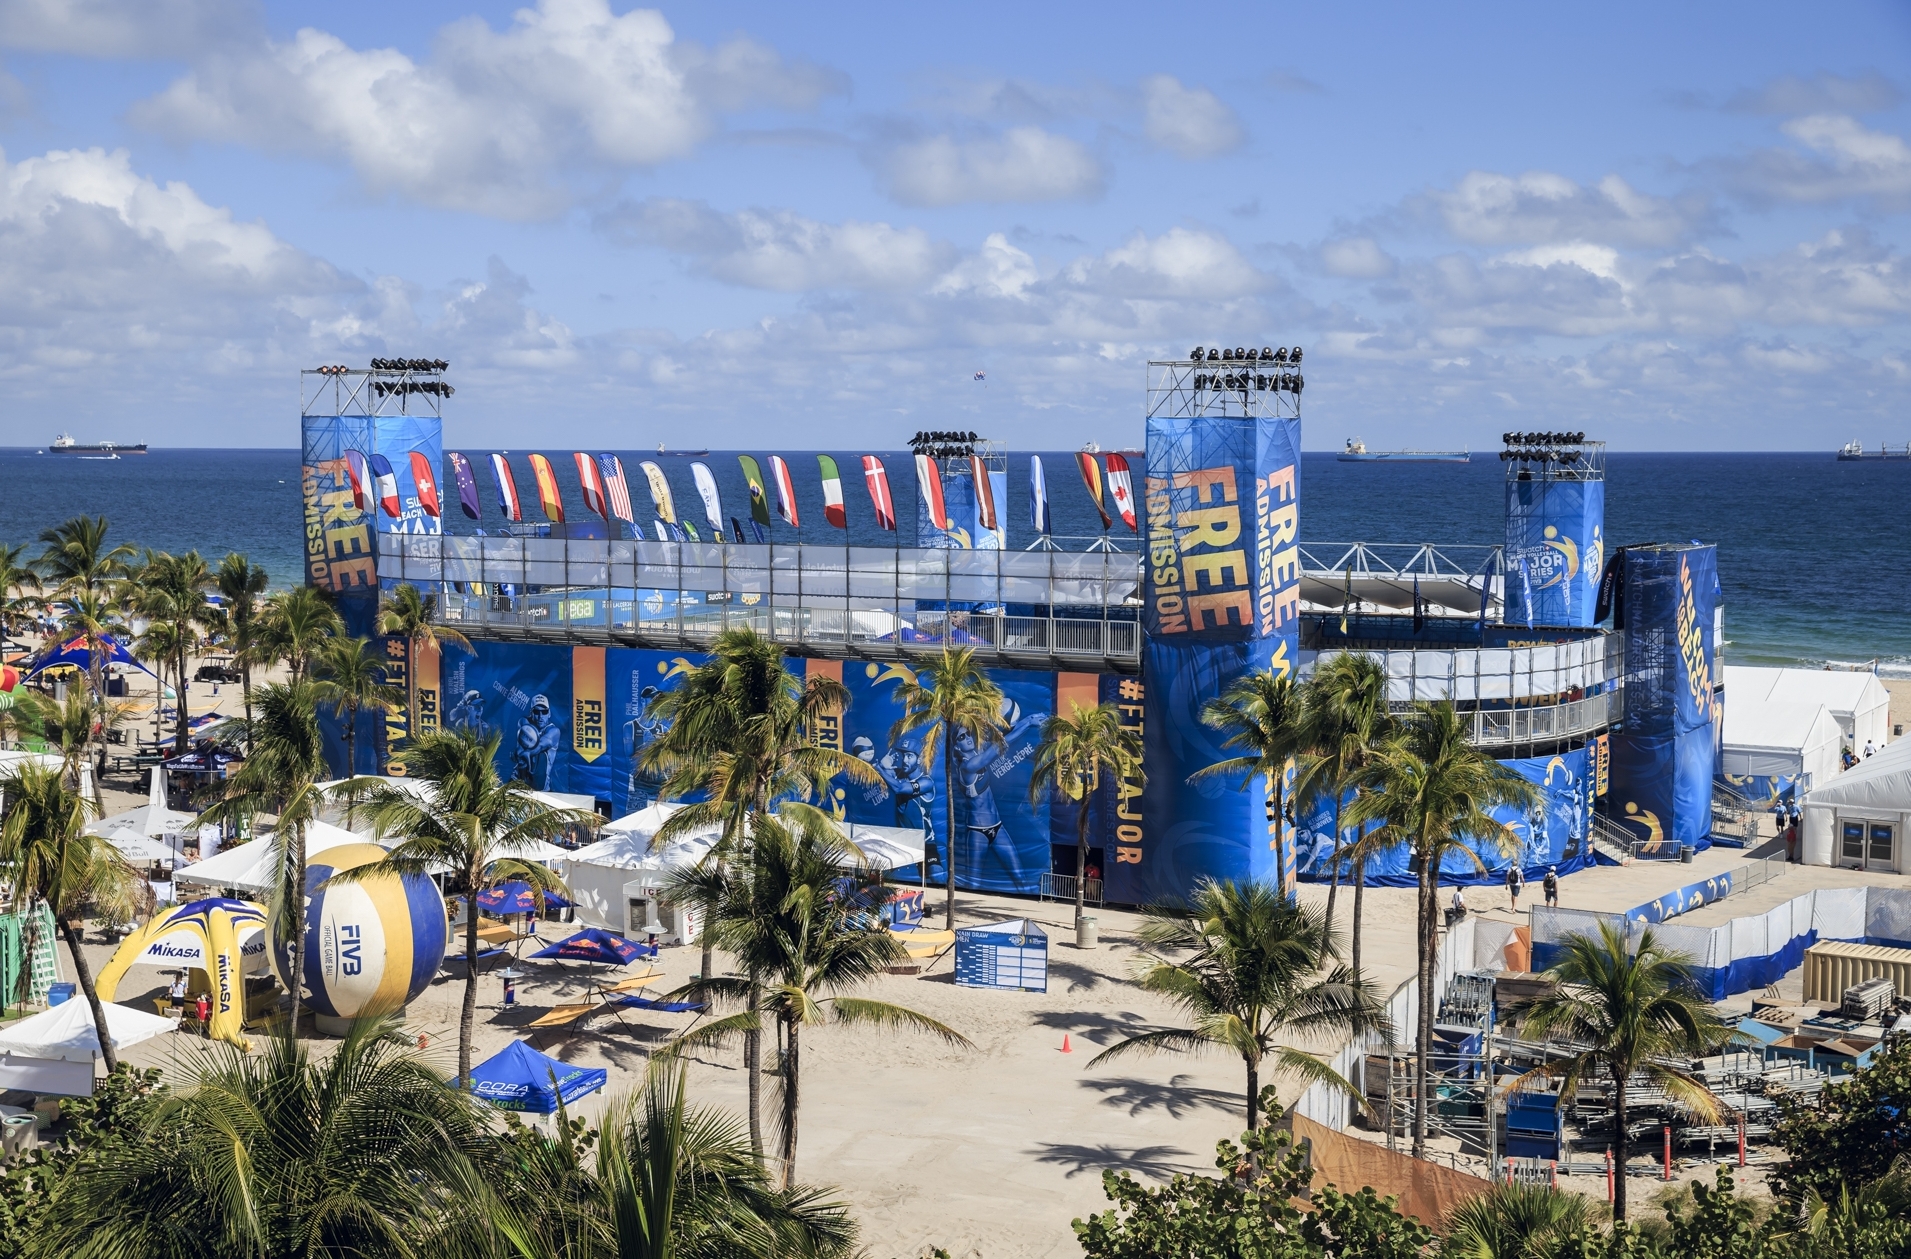 Bring on the pool play at the Fort Lauderdale Major! Photocredit: Martin Steinthaler.